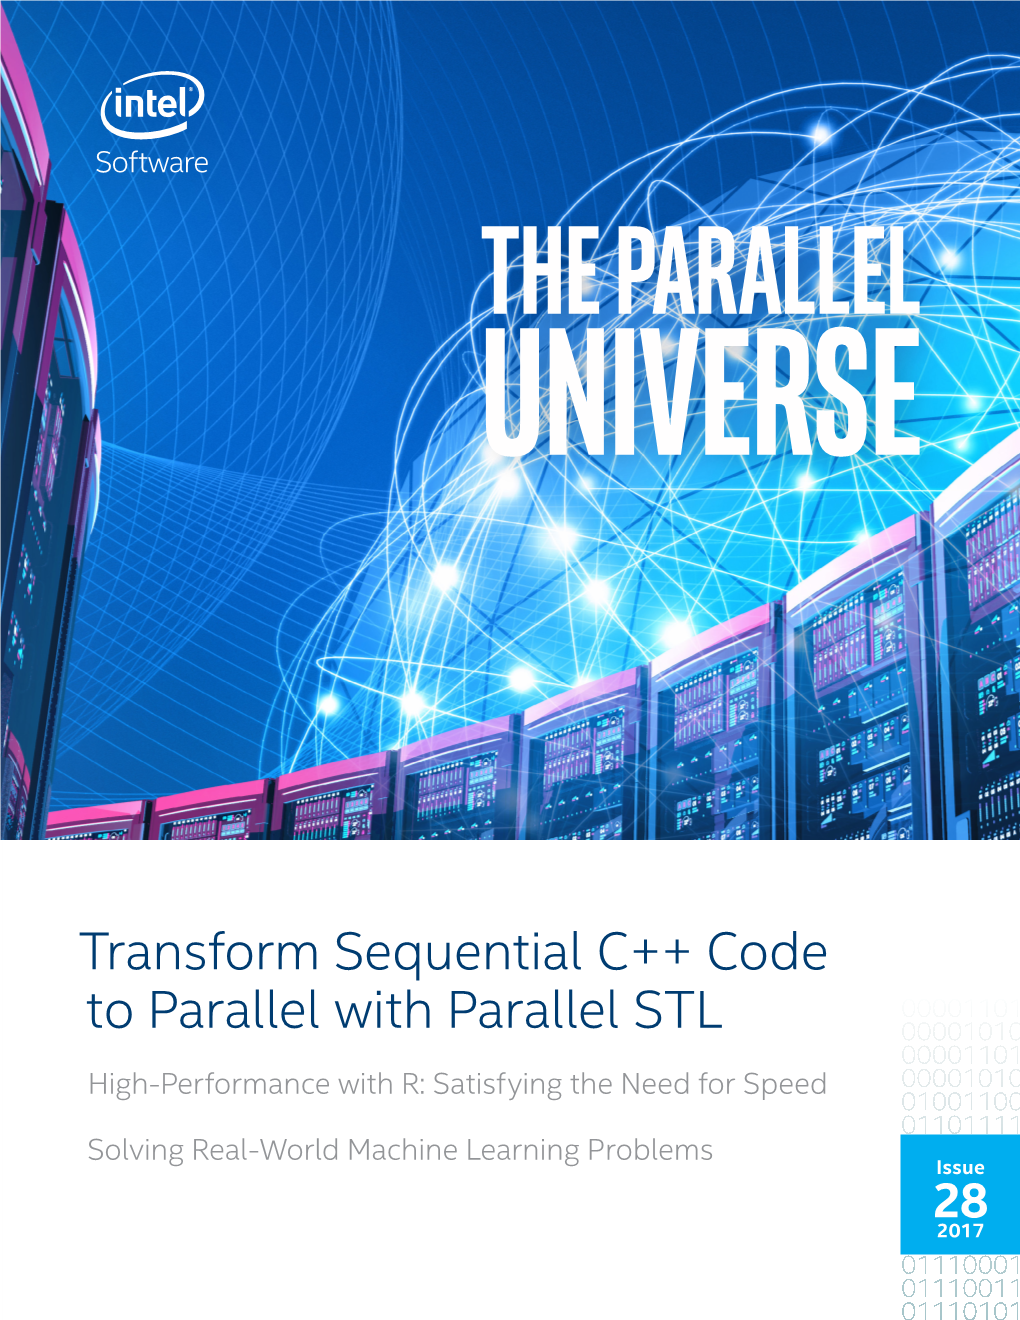 Transform Sequential C++ Code to Parallel with Parallel